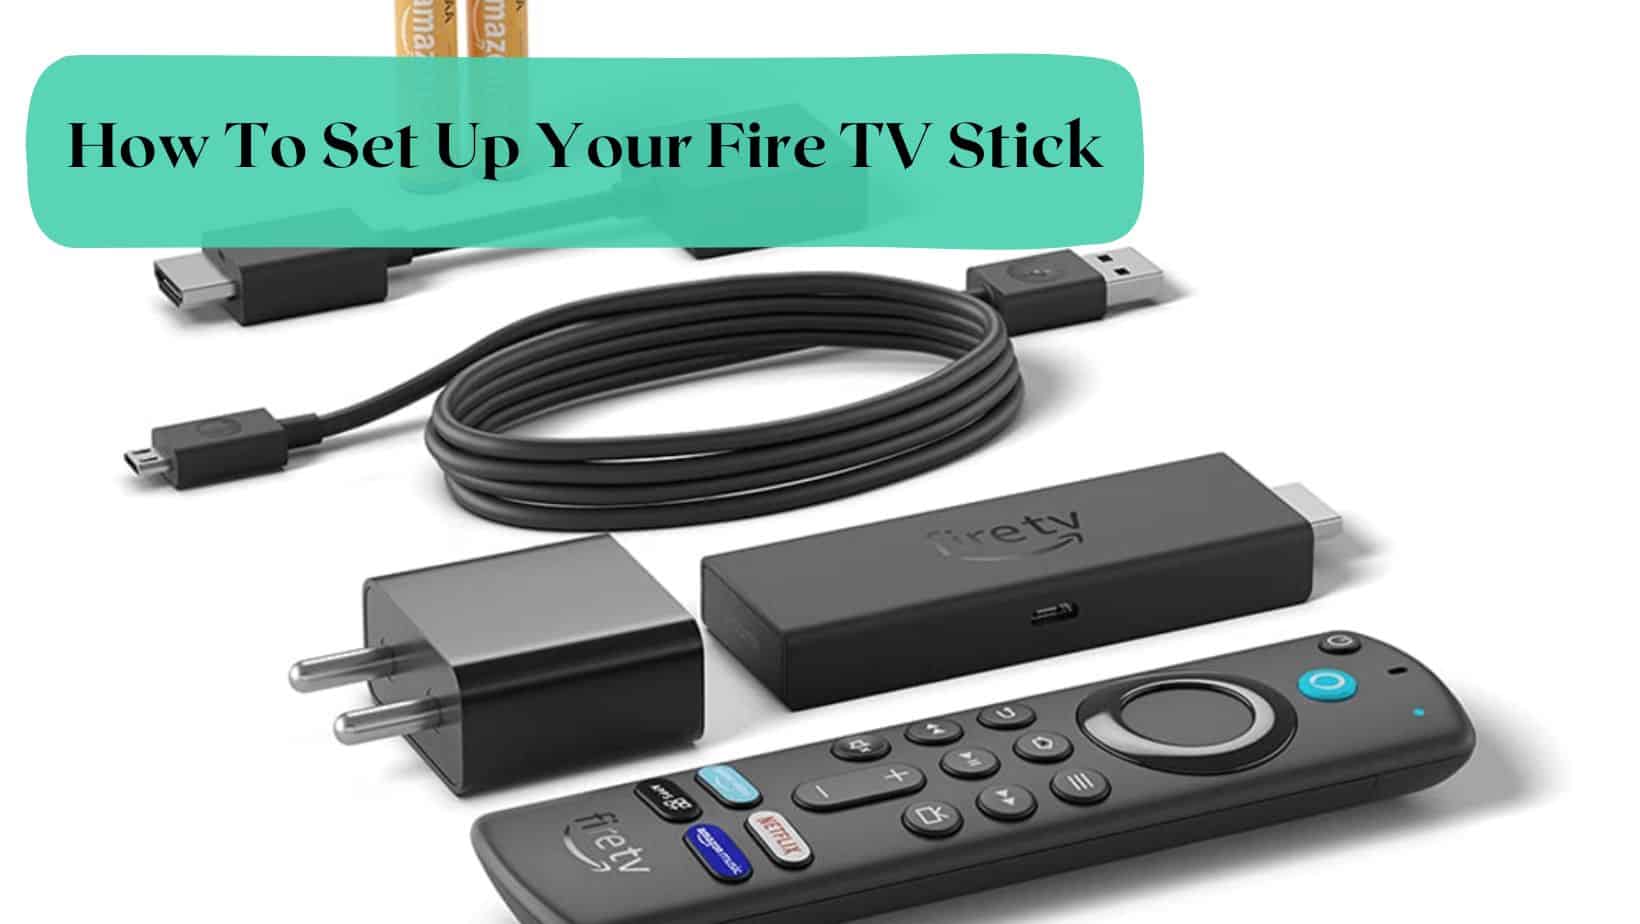 How To Set Up Your Fire TV Stick